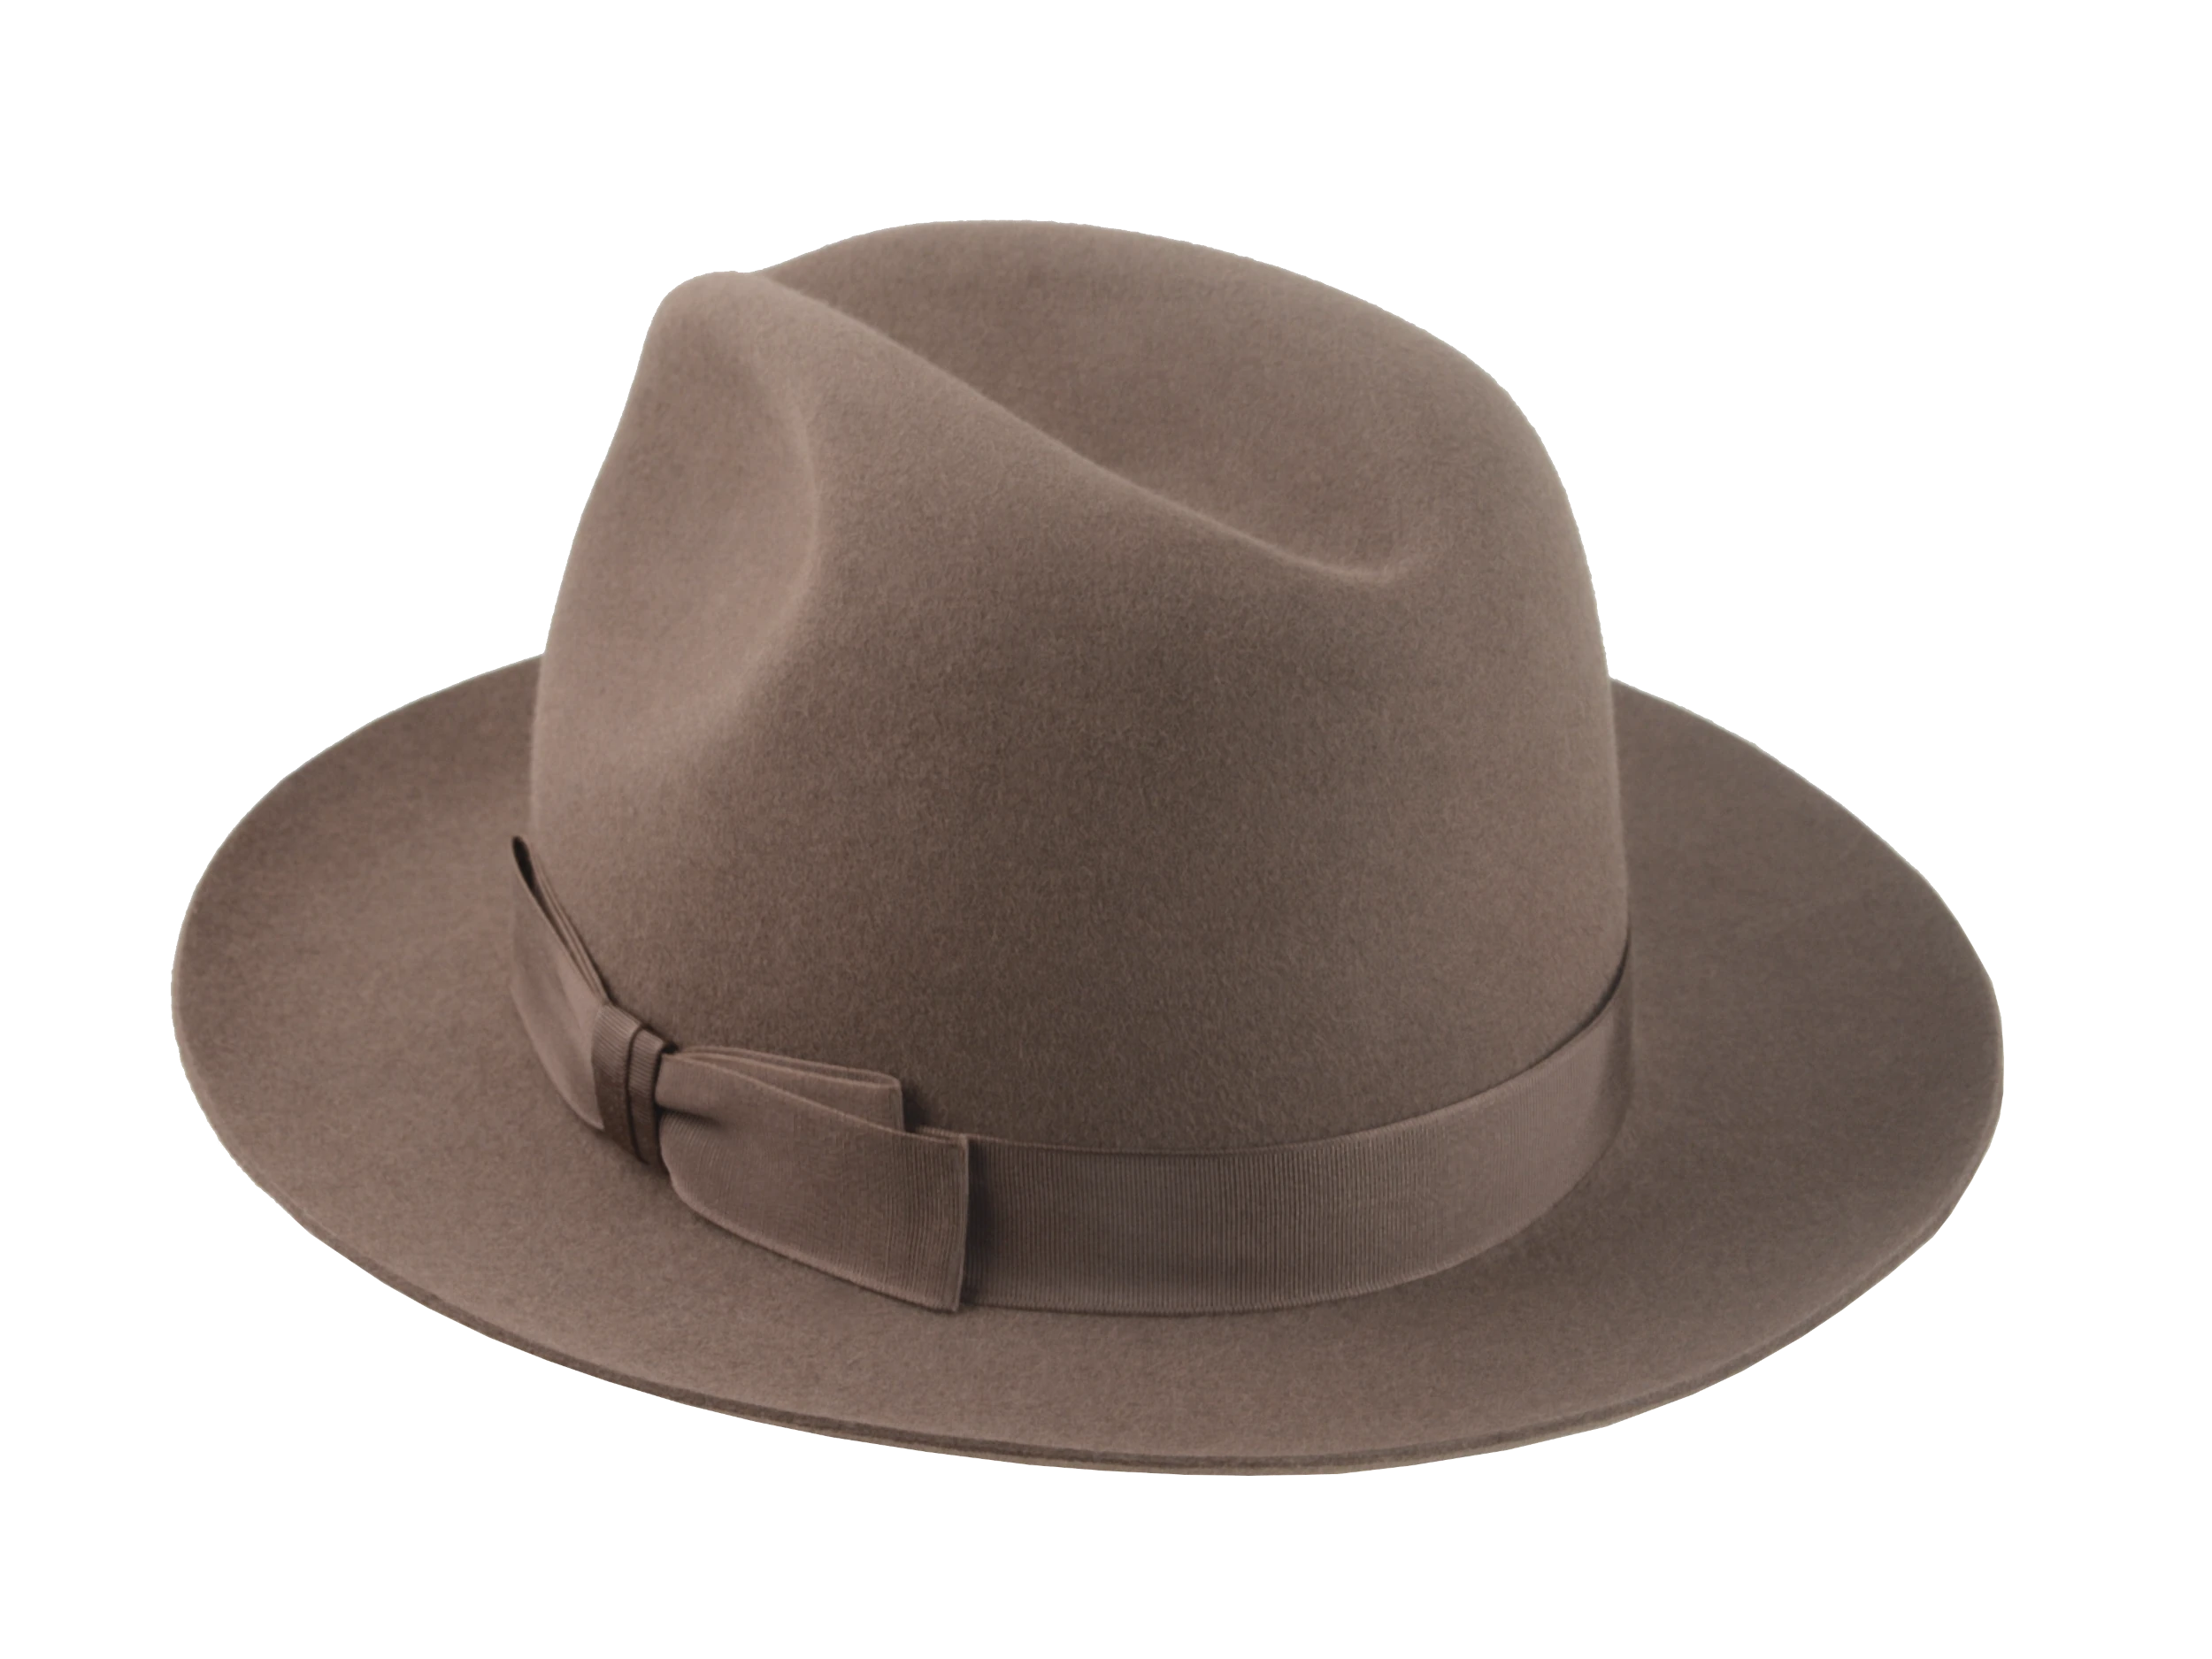 The Fortis: Angled perspective highlighting the luxurious rabbit fur felt material | Agnoulita Hats